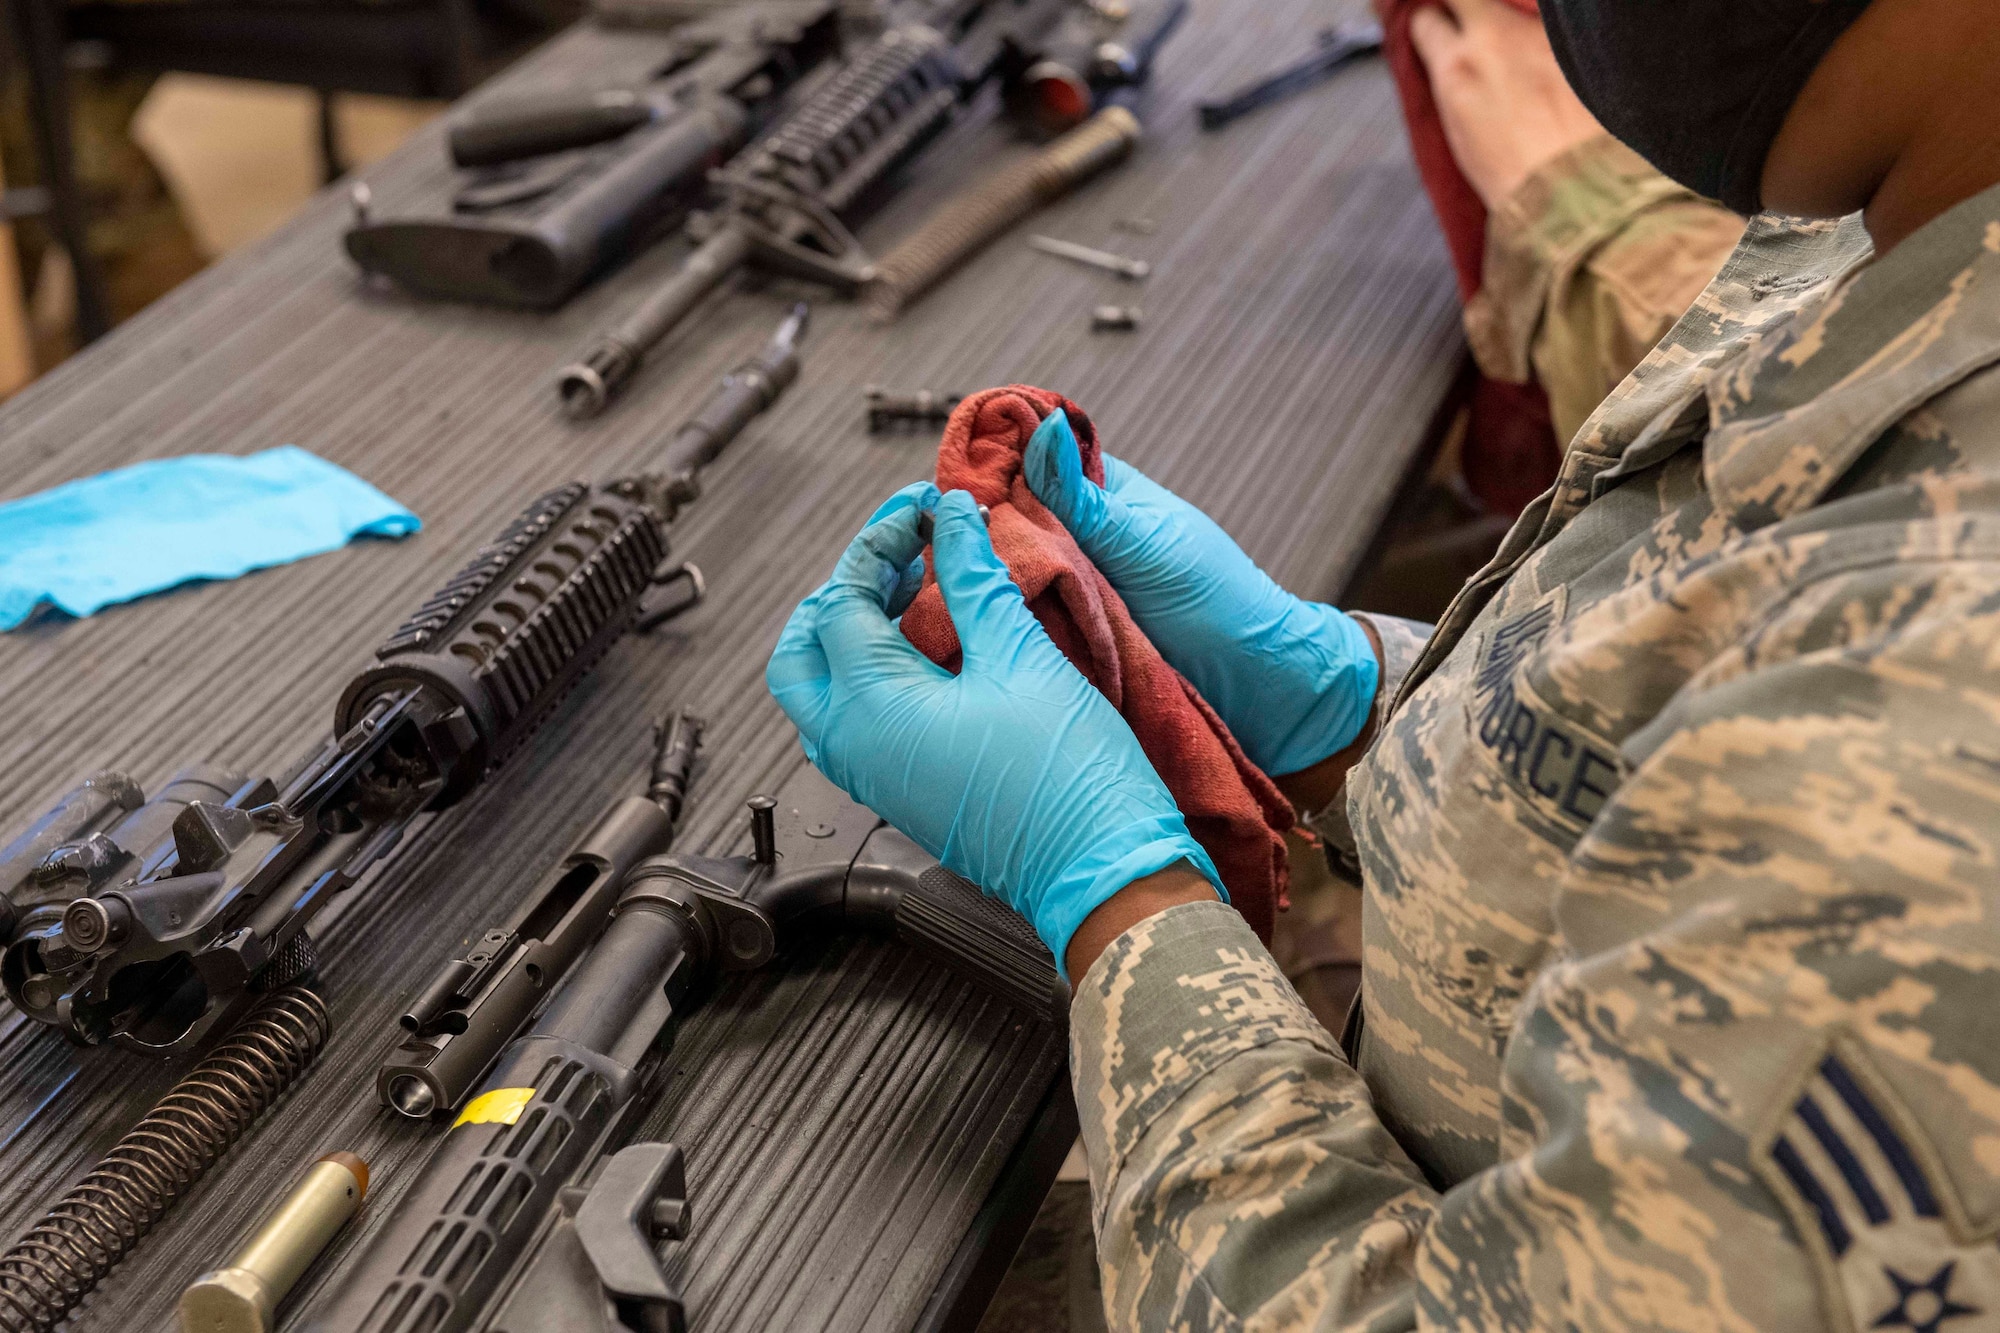 A female Airman disassembles and cleans an M4 carbine.